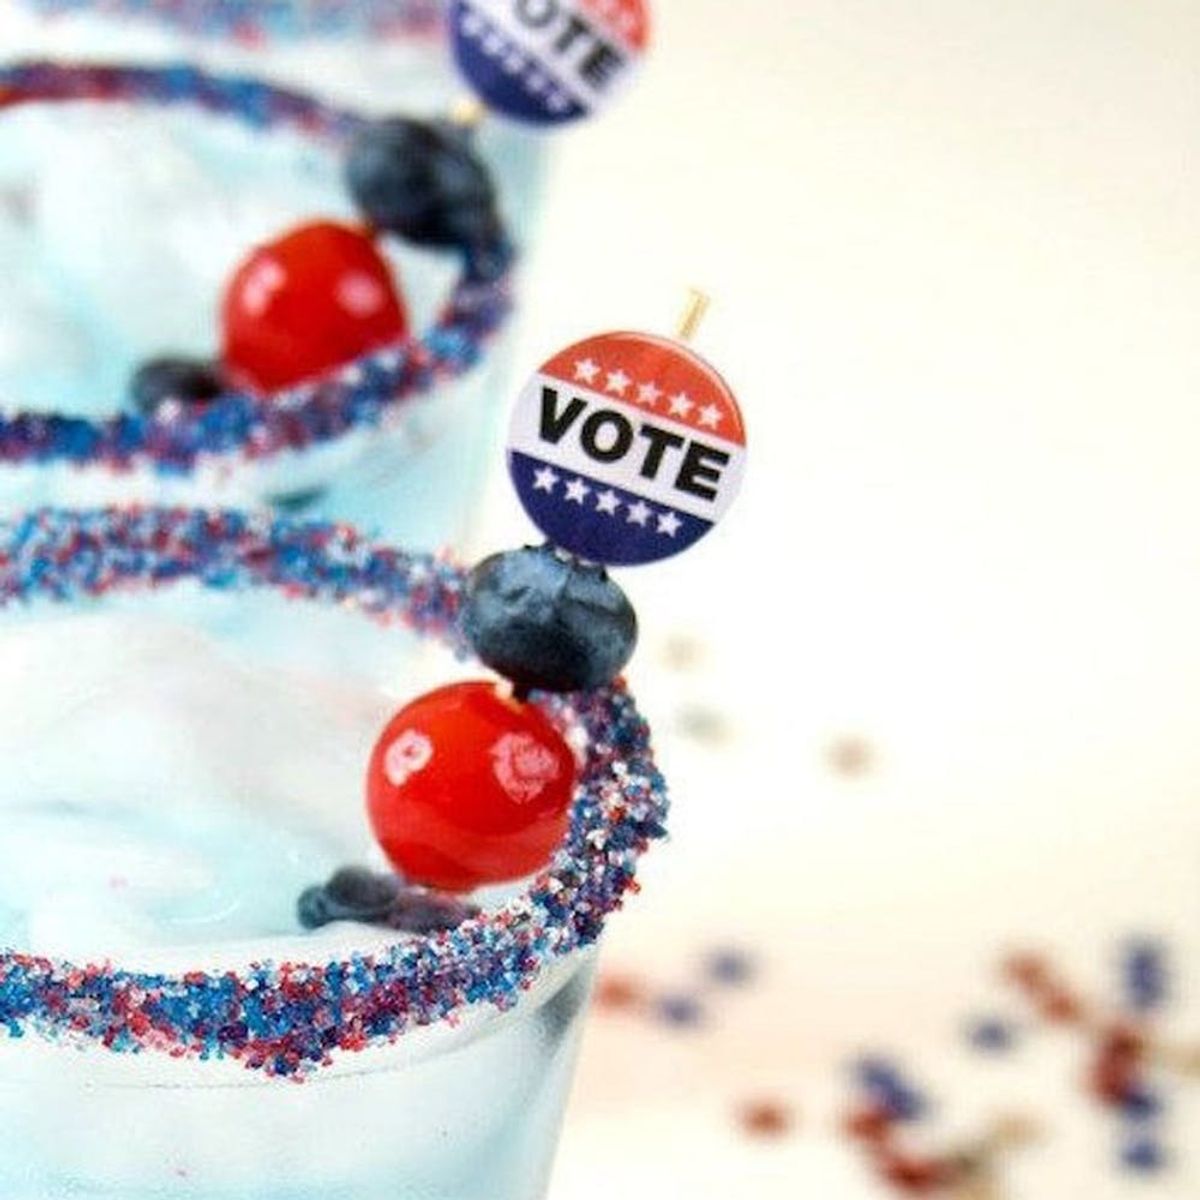 Get PoLITical With These 21 Election Party Ideas